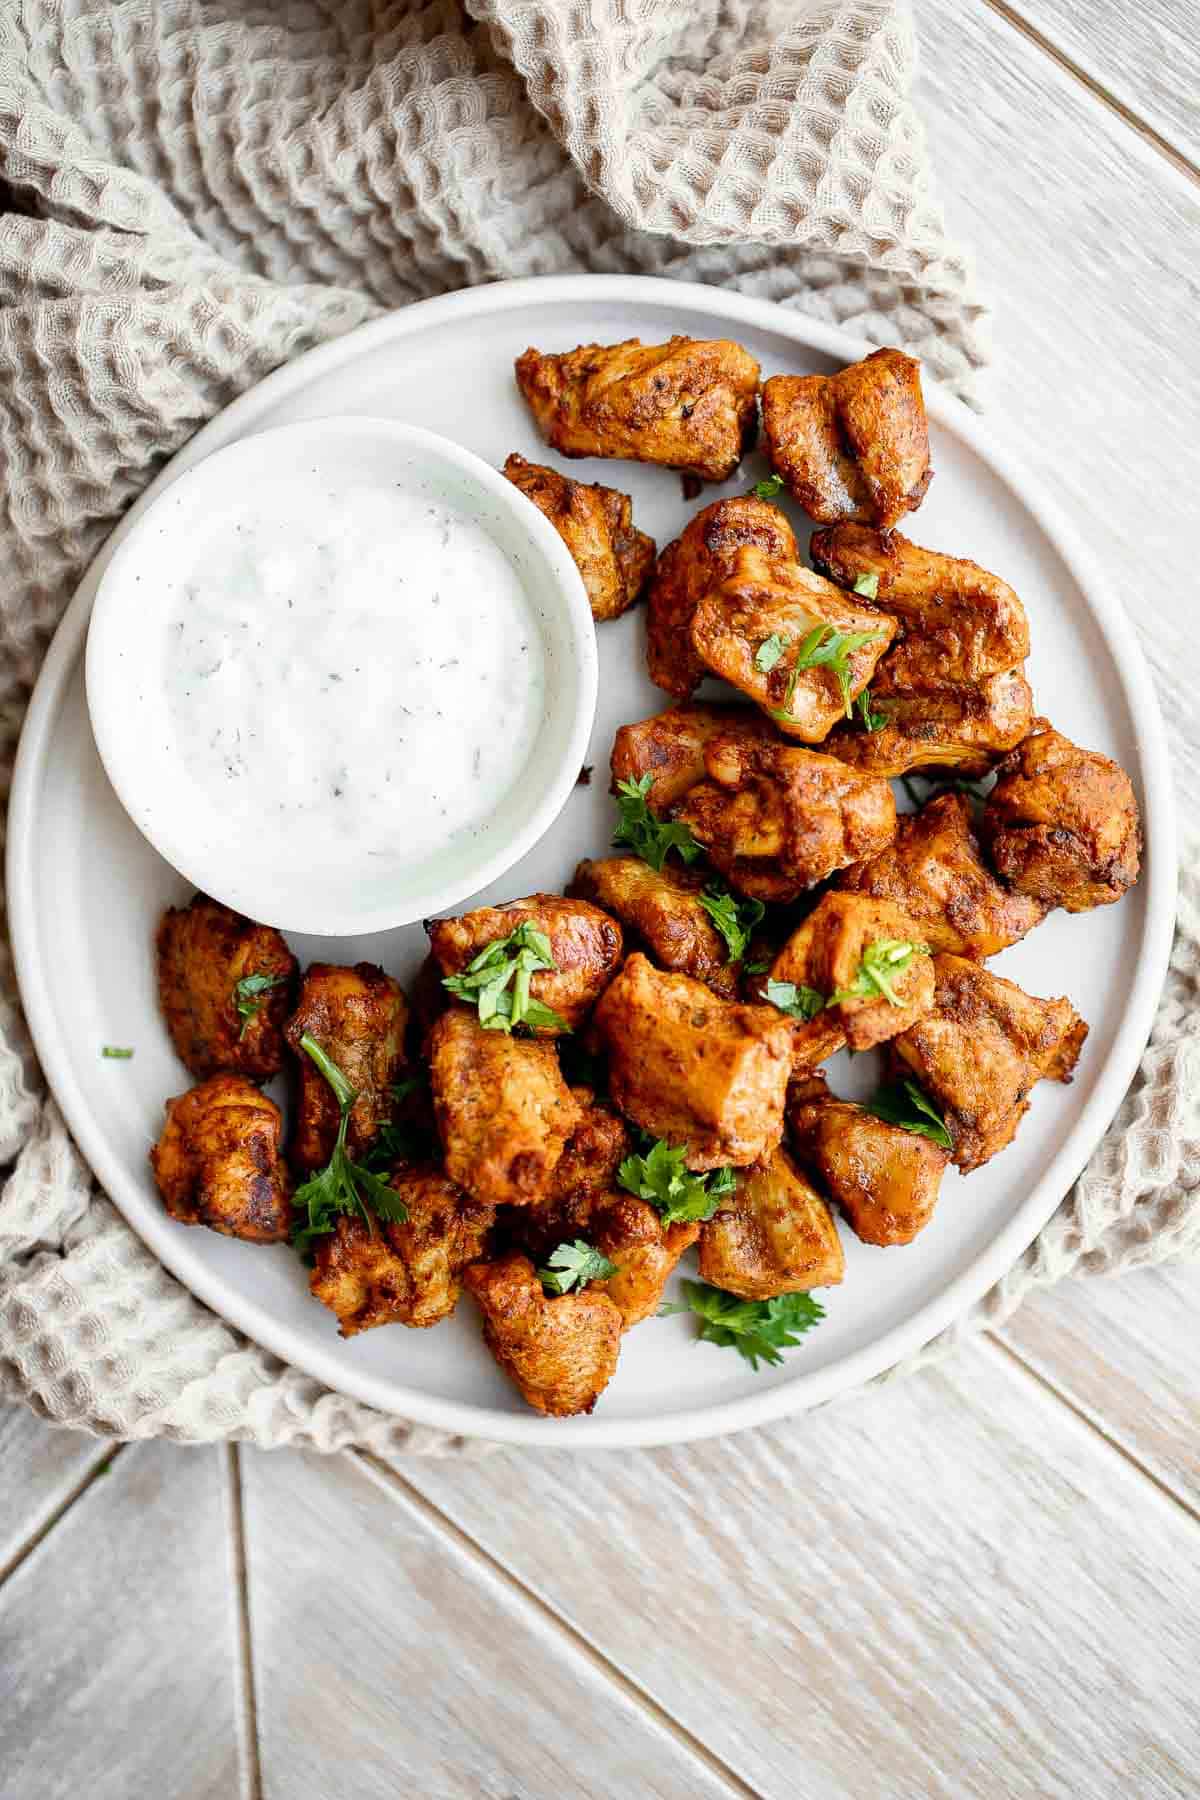 Air Fryer Tandoori Chicken Bites are juicy, tender, and loaded with authentic Indian spices. This quick easy air fryer recipe is perfect on busy weeknights. | aheadofthyme.com